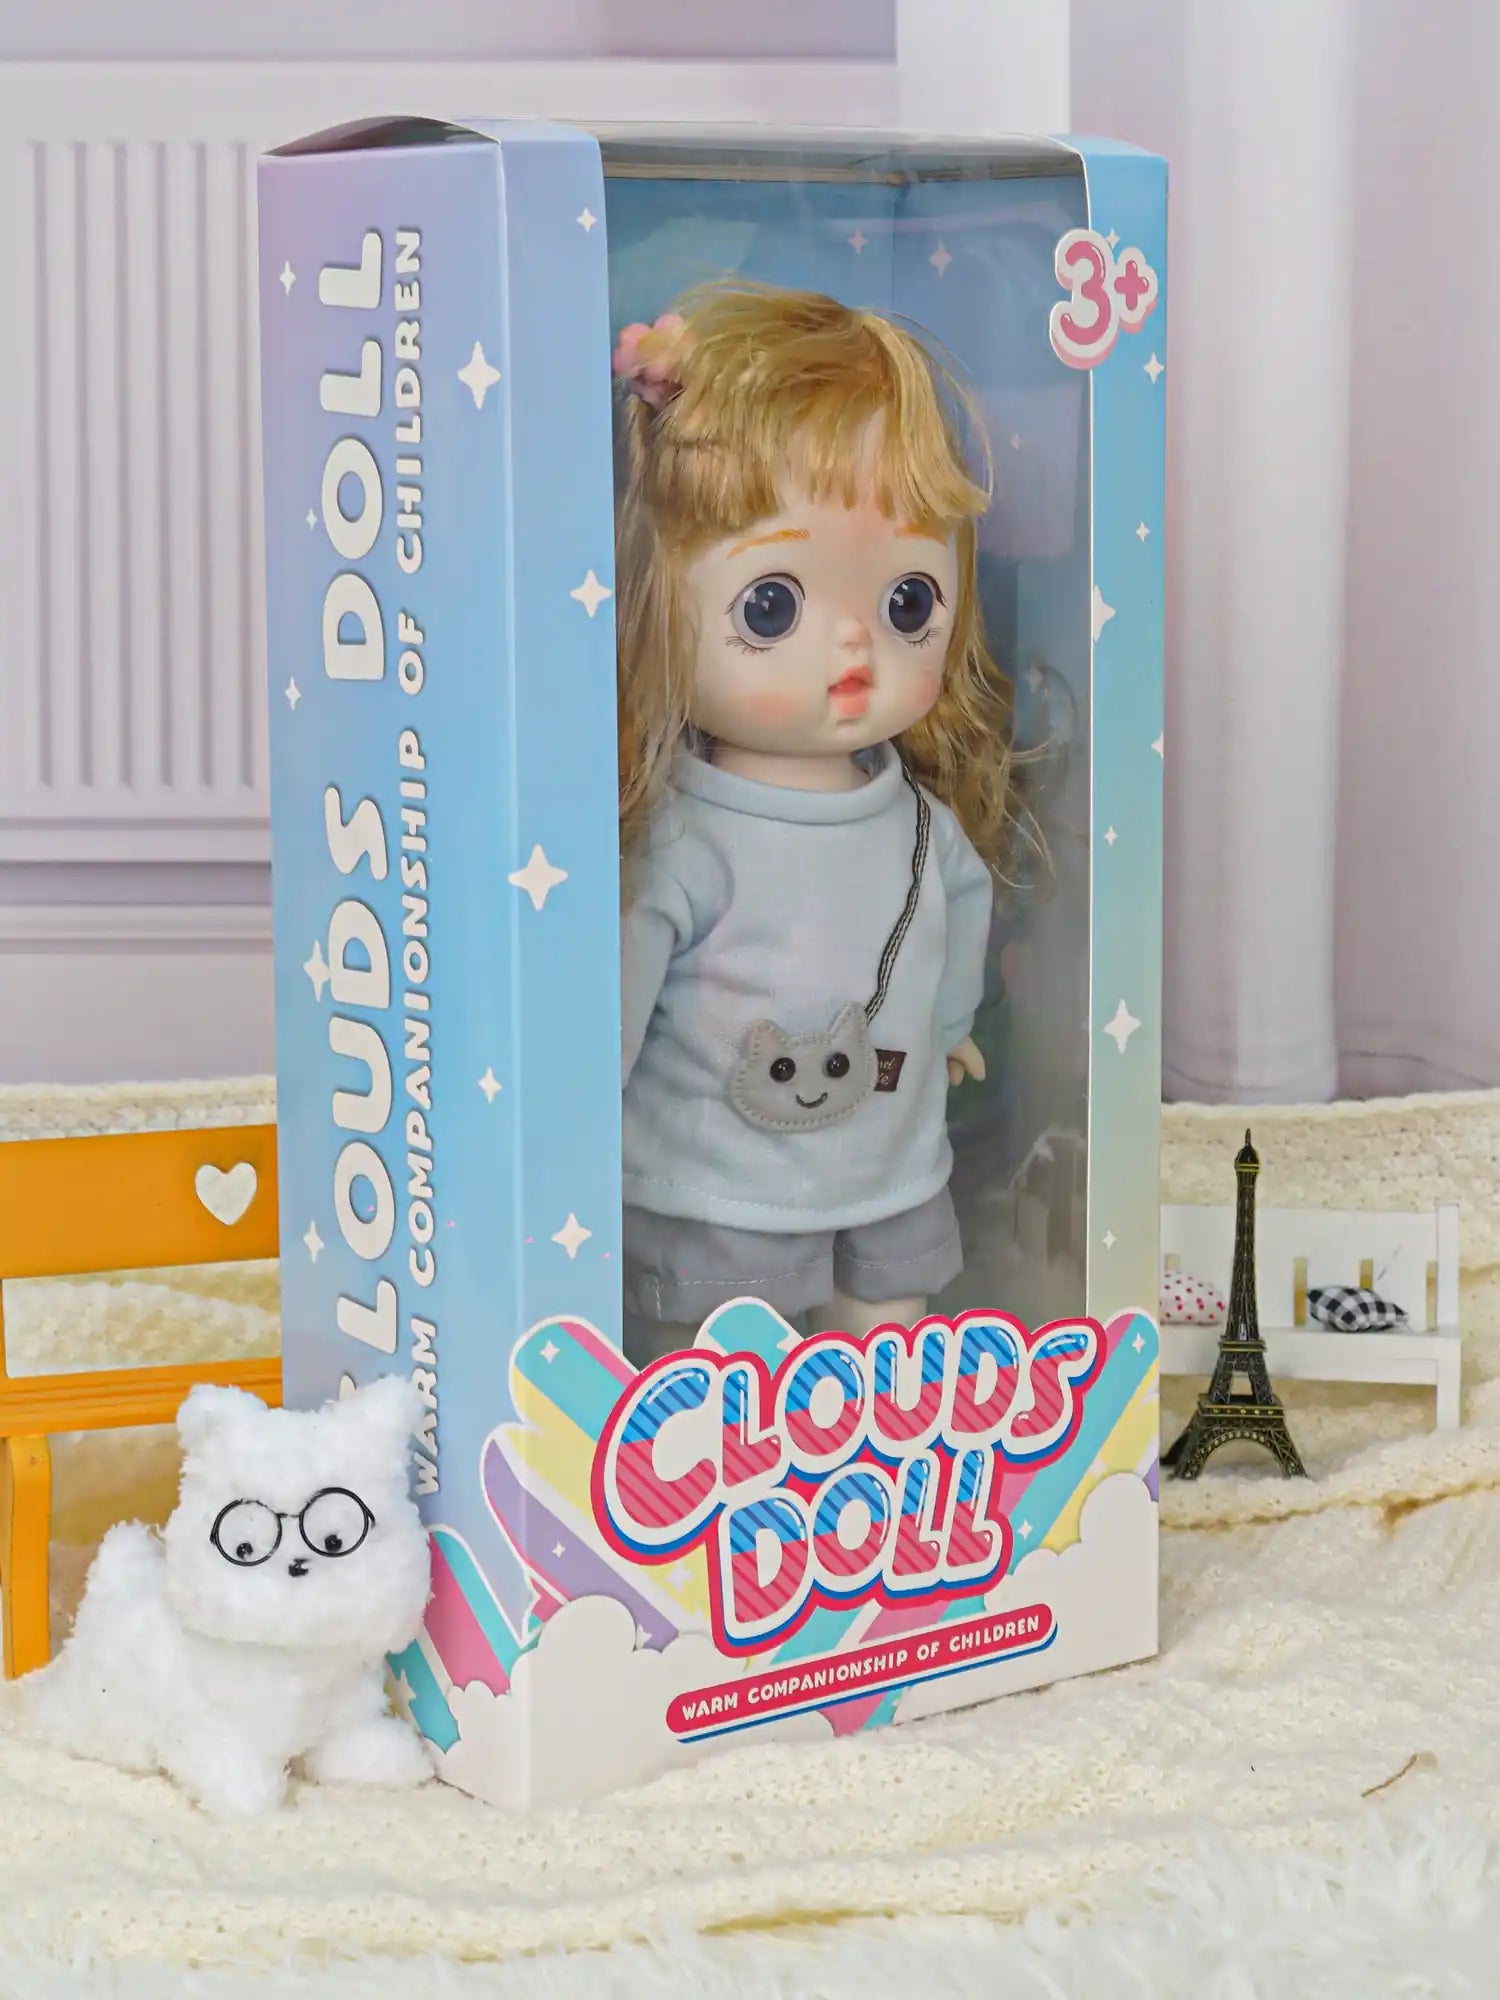 A miniature doll with a friendly expression, dressed in a blue outfit and shorts, in a room with a plush toy and miniature landmarks.